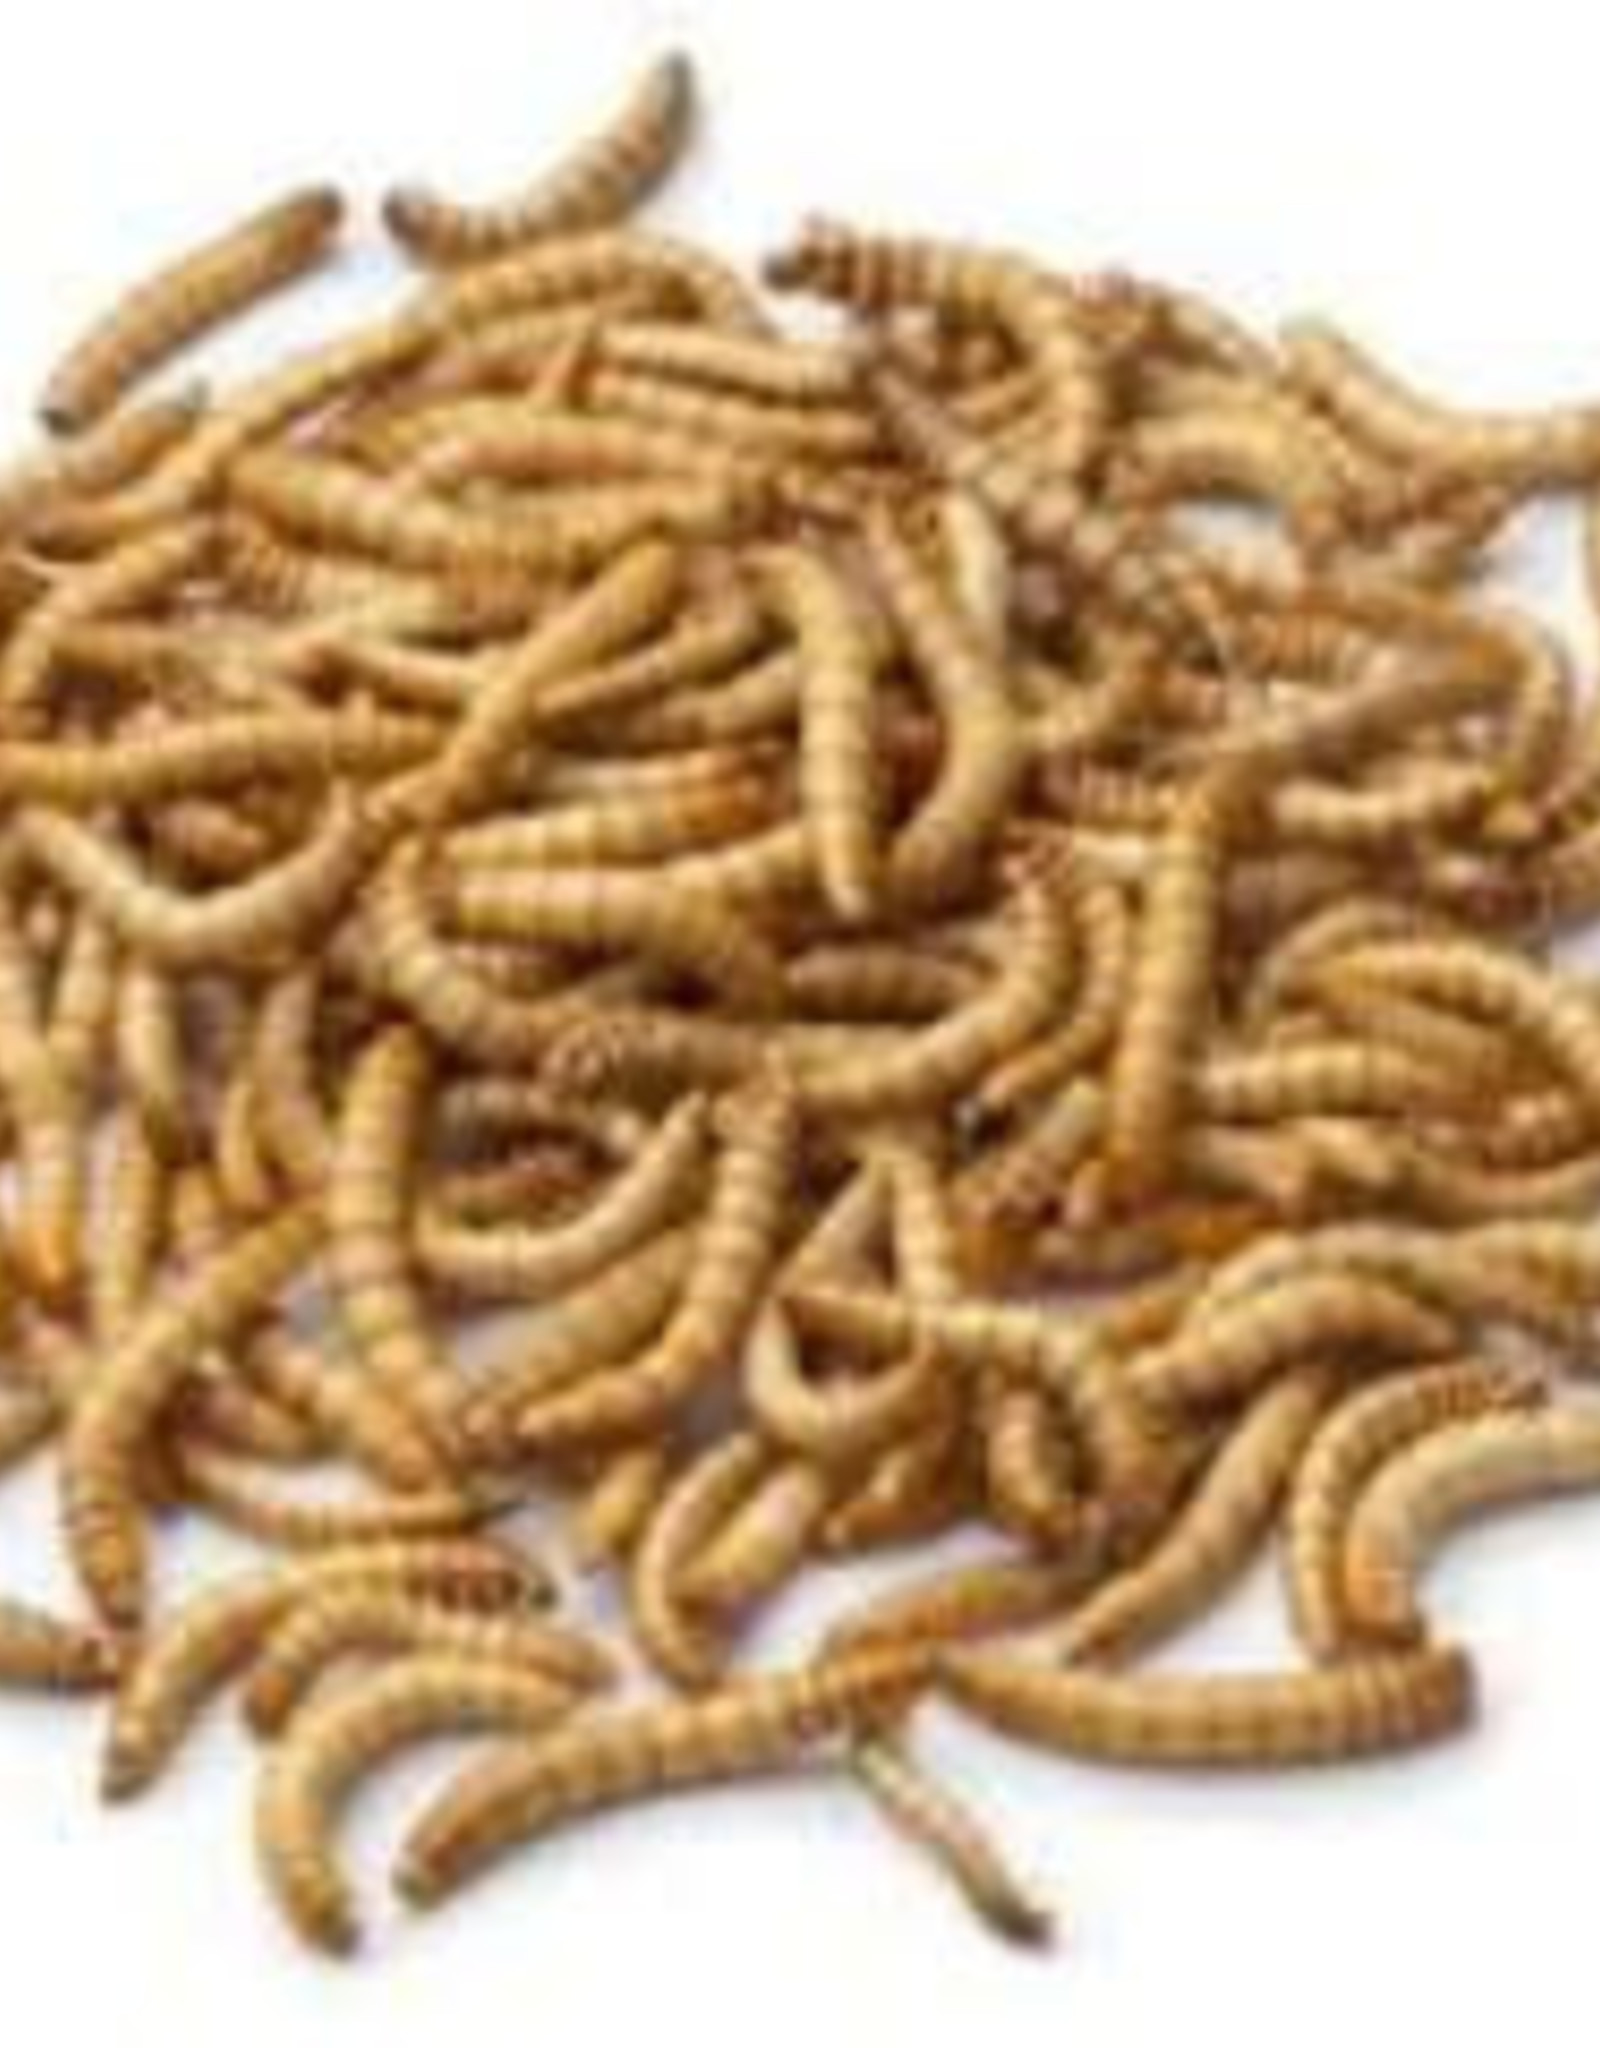 LIVE- GIANT MEALWORMS-